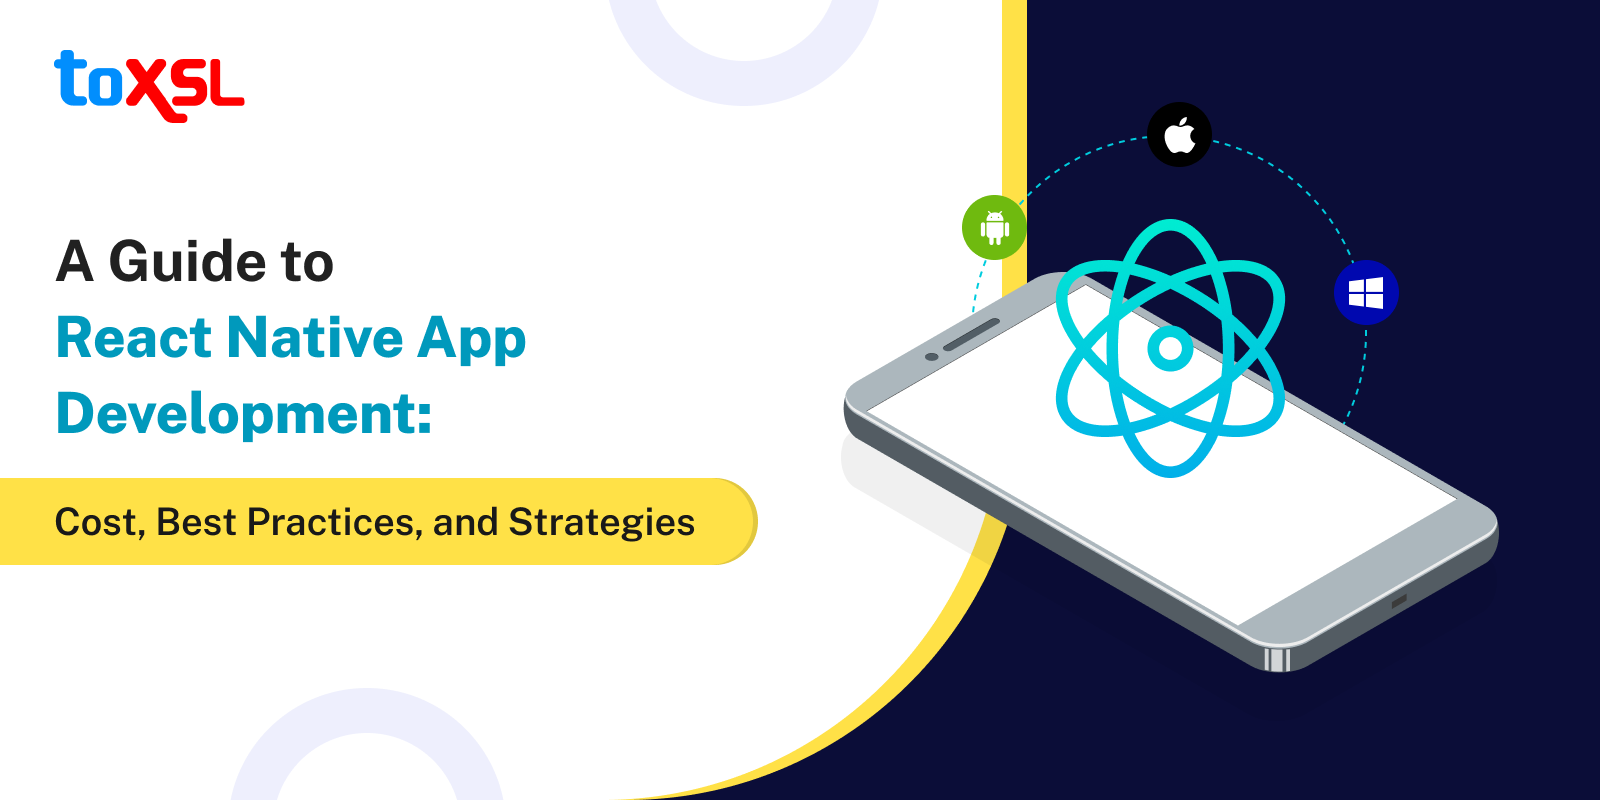 A Guide to React Native App Development: Cost, Best Practices, and Strategies